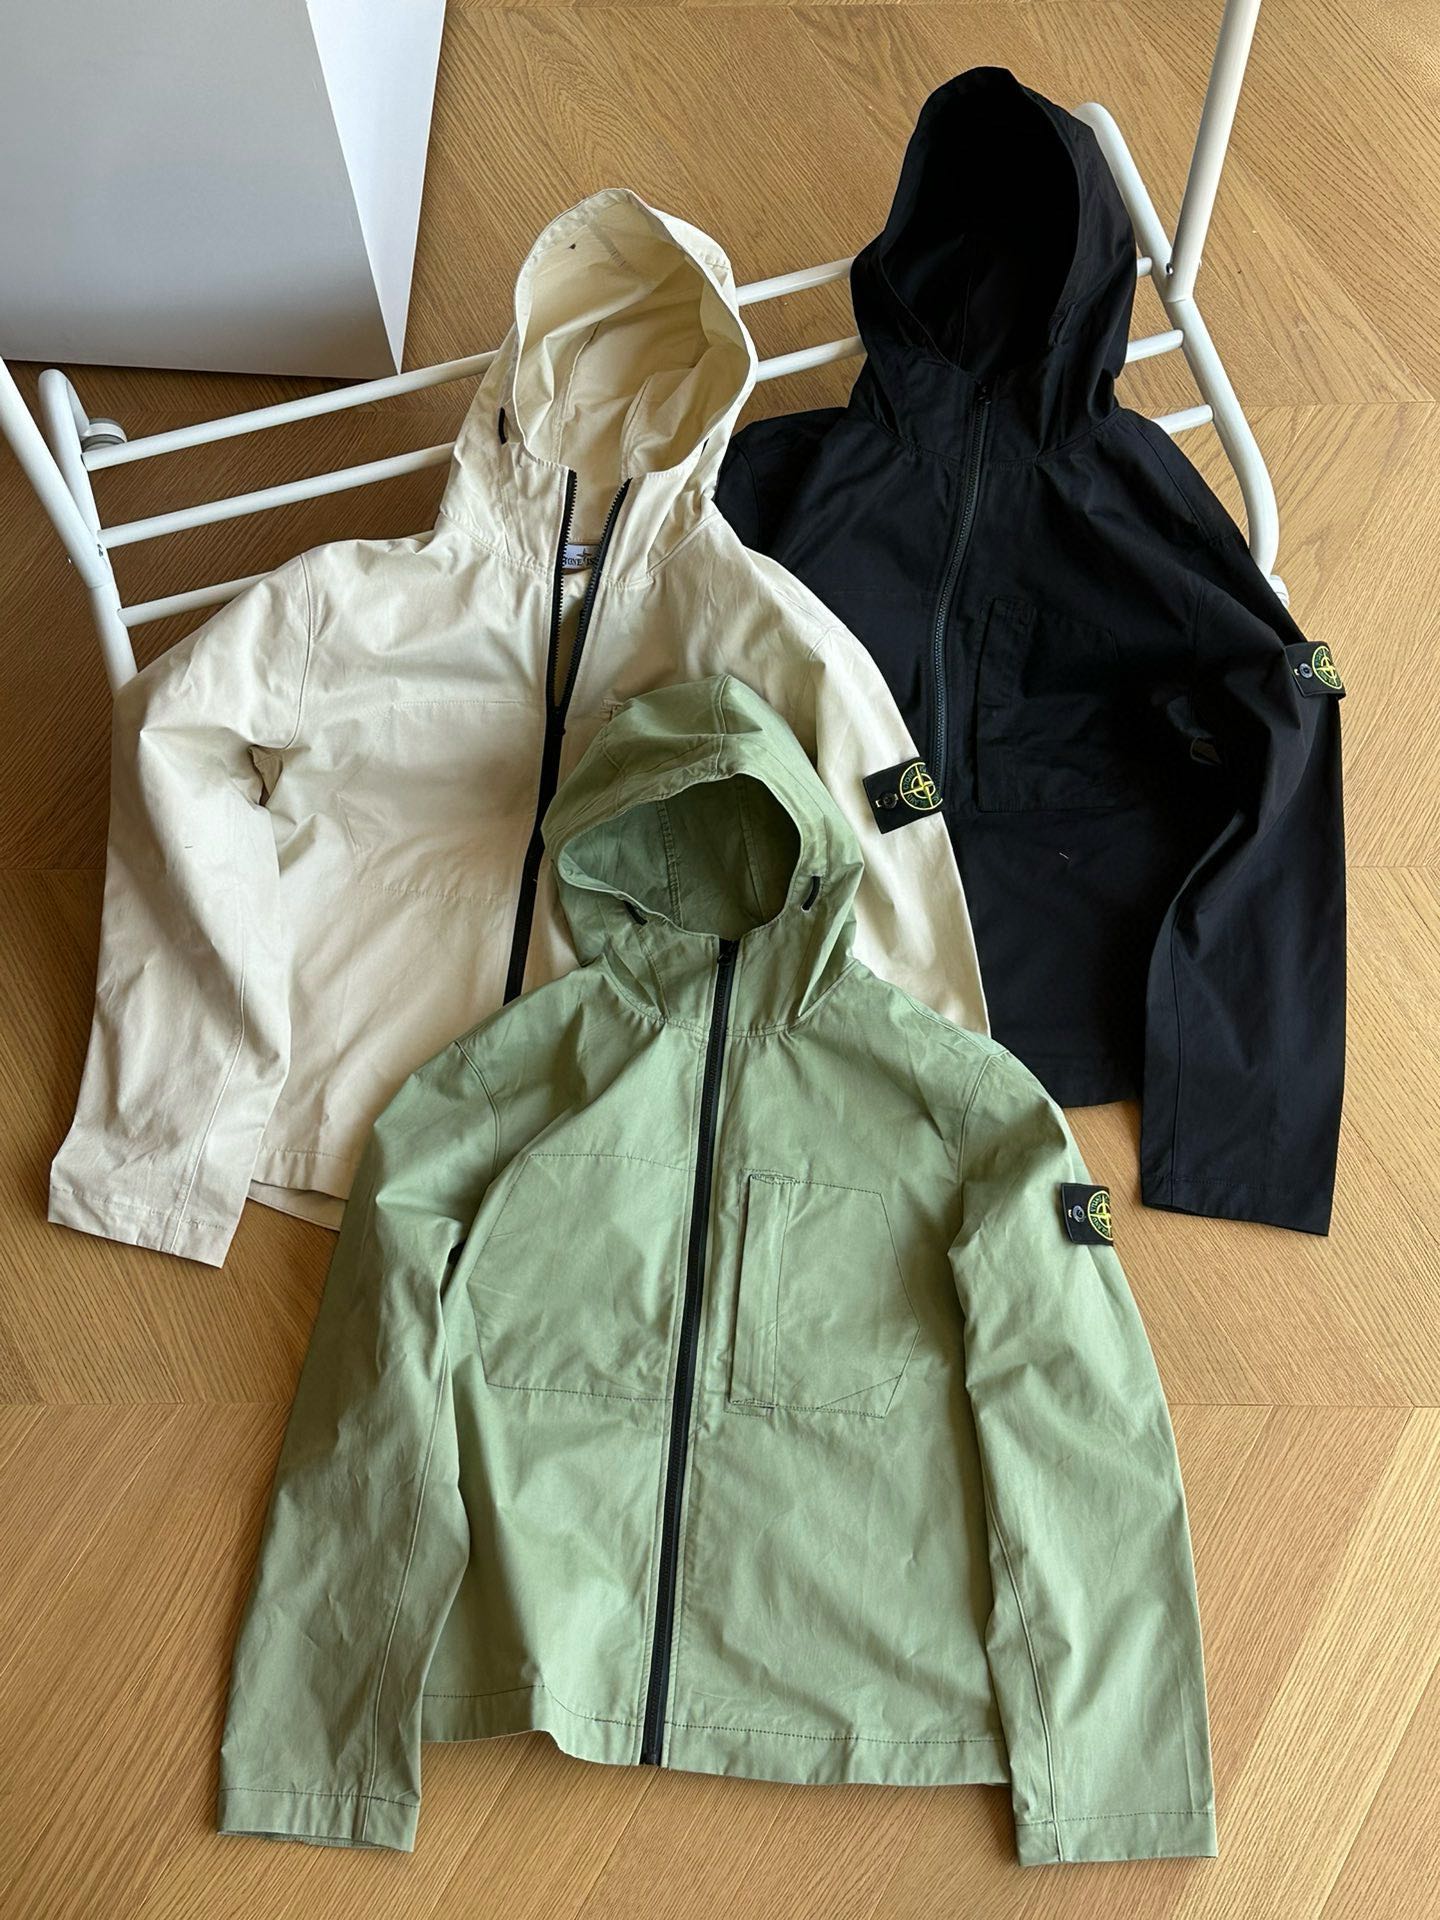 Stone Island Clothing Coats & Jackets Black Green Khaki Unisex Spring/Fall Collection Hooded Top